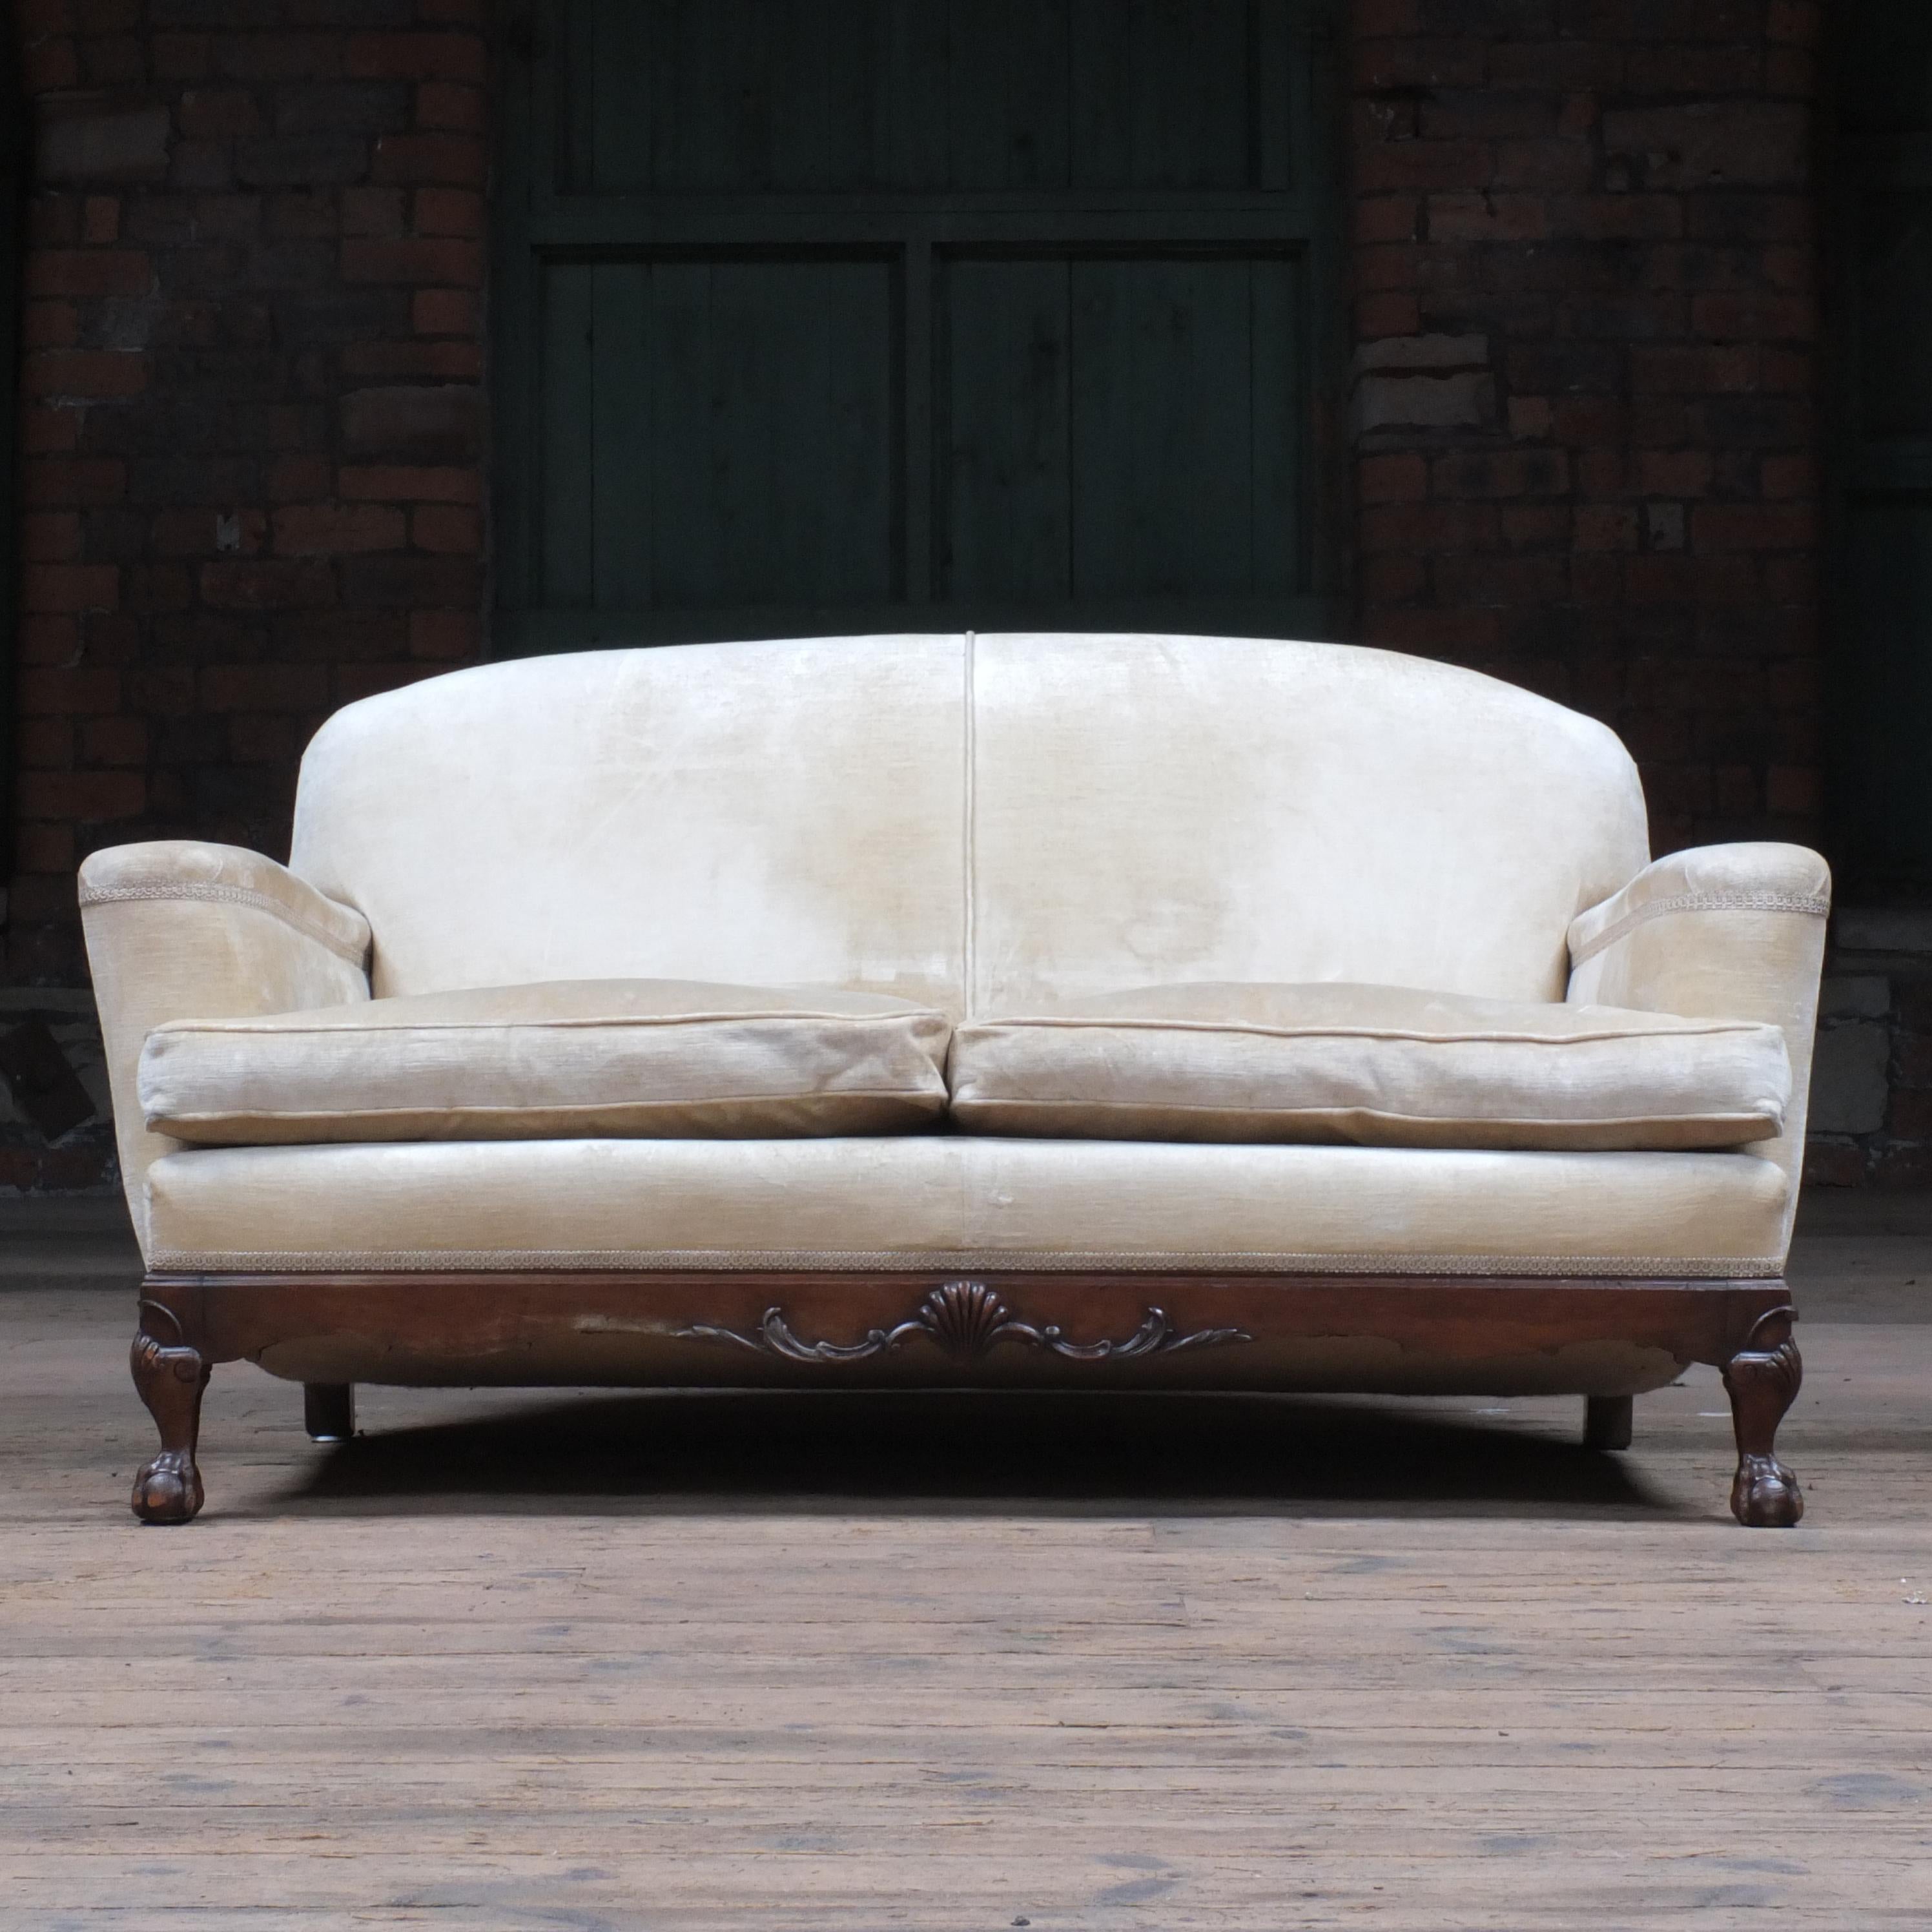 A good quality walnut 2 seater sofa. The downward slope of the arms and seat topped with the feather filled cushions and horse hair interior make this a very comfortably sofa. The opulent off white velvet upholstery is in good clean order and very